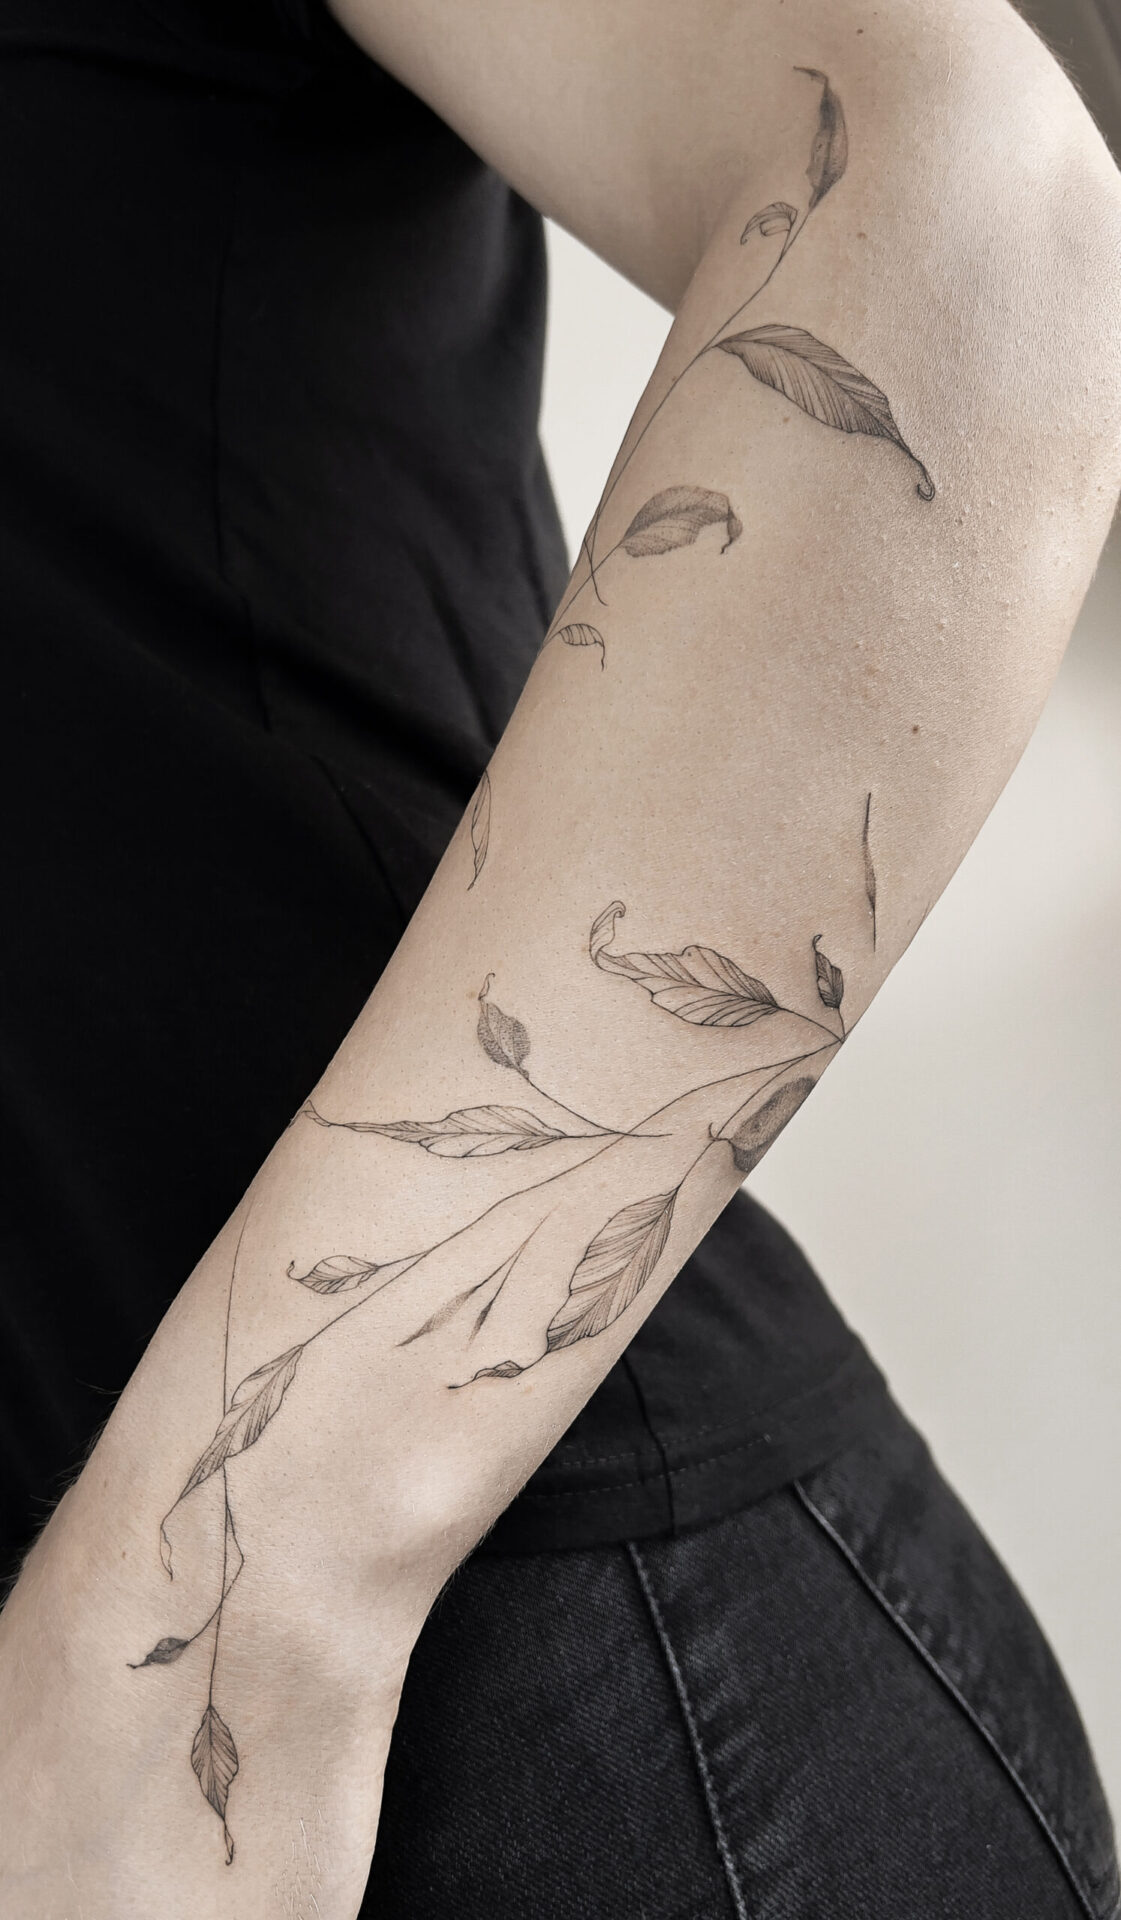 forearm fineline flower tattoo with leaves from smasli ink an female tattoo artist working in salzburg austria